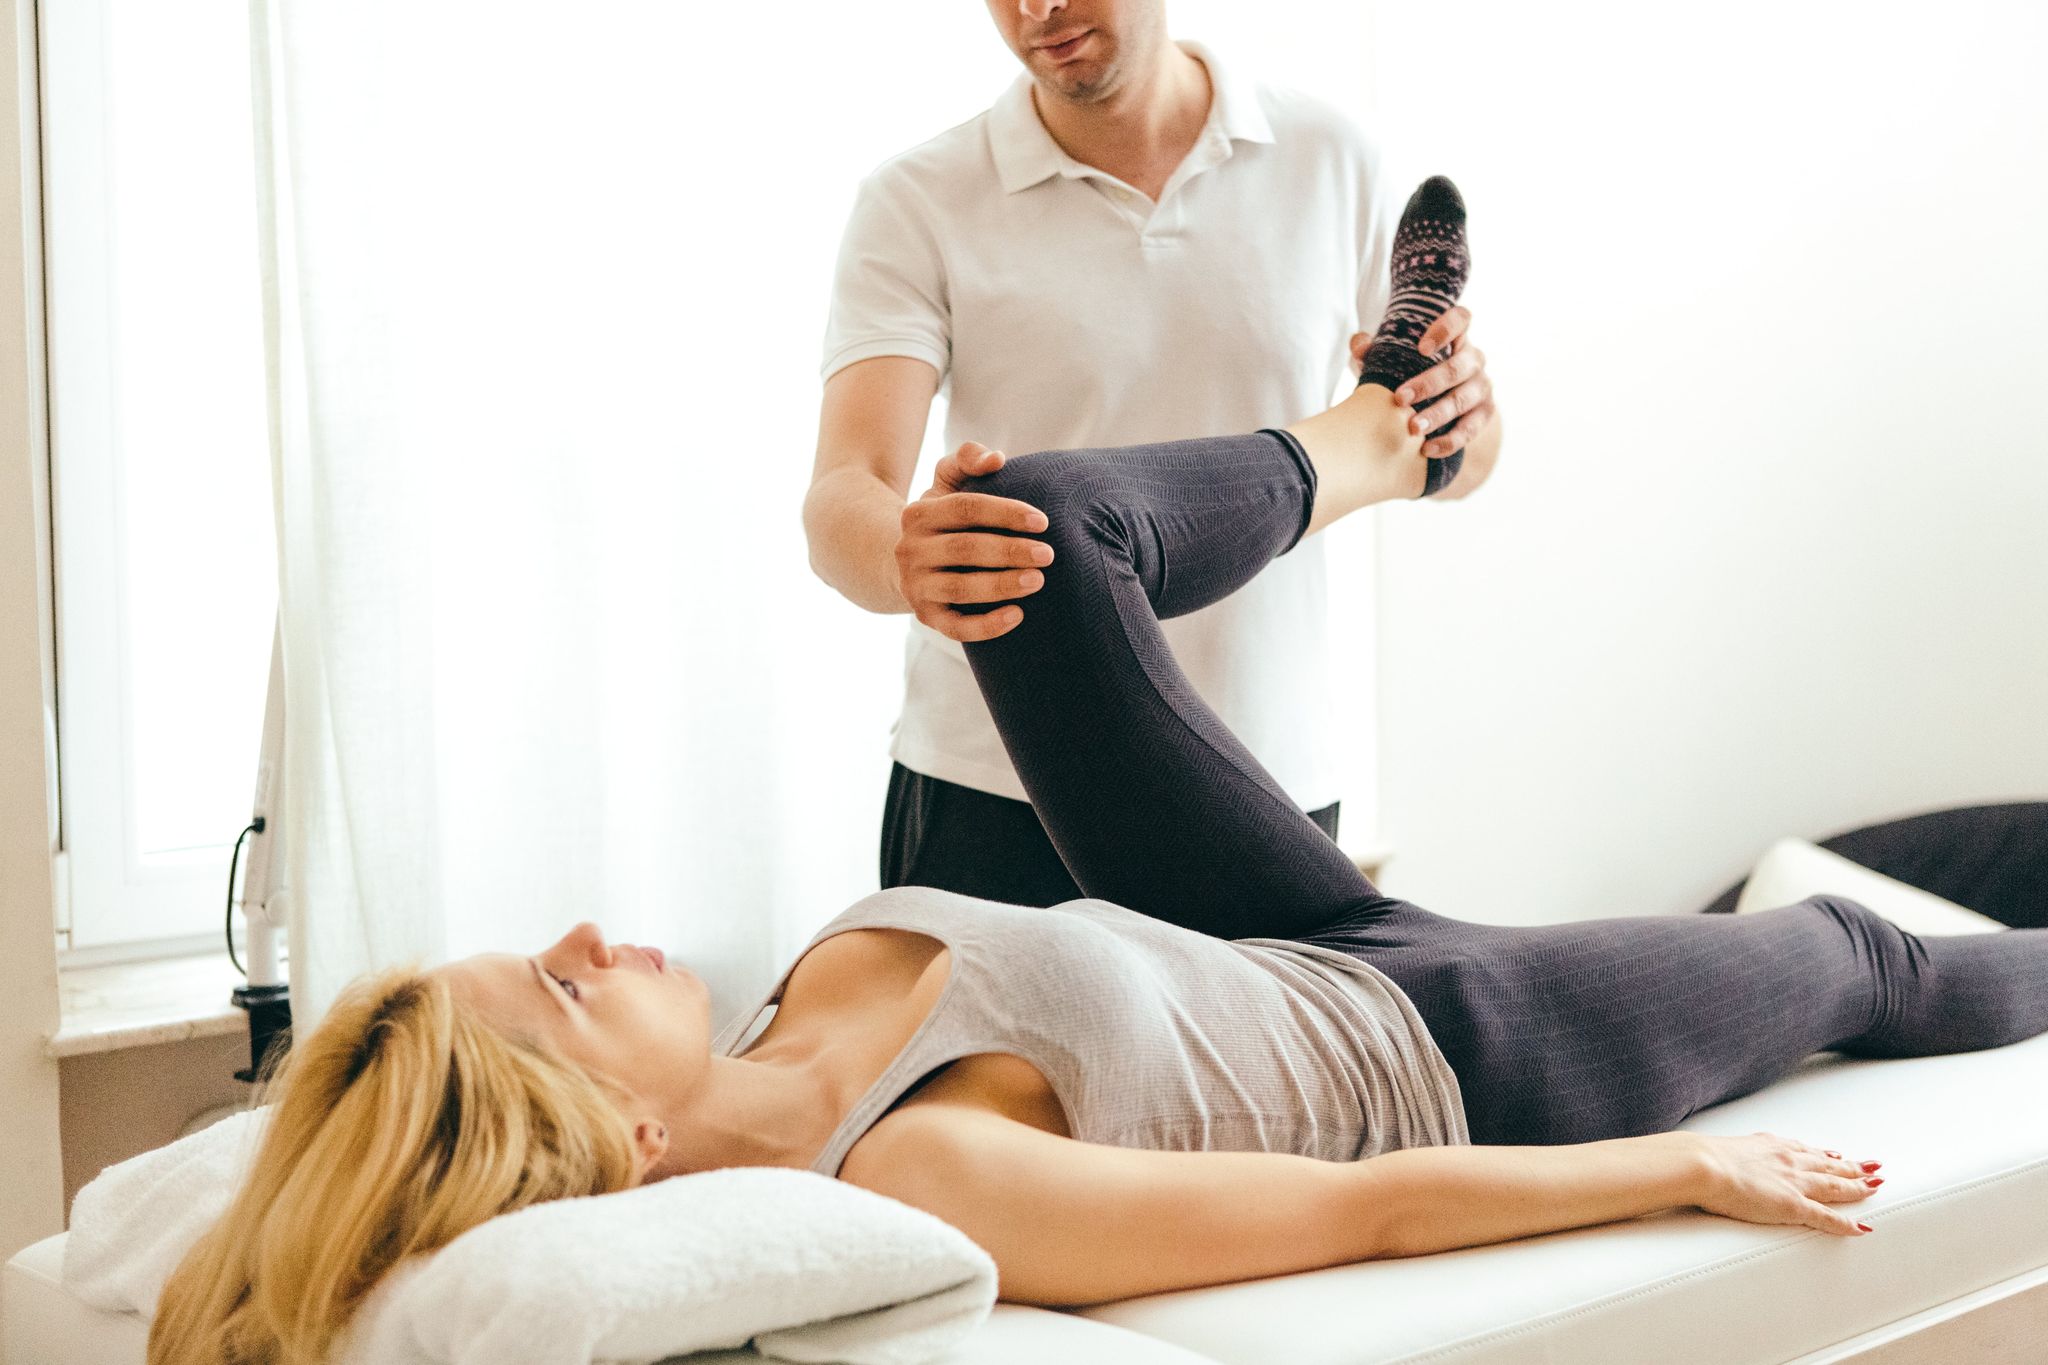 Everything you need to know about getting a sports massage